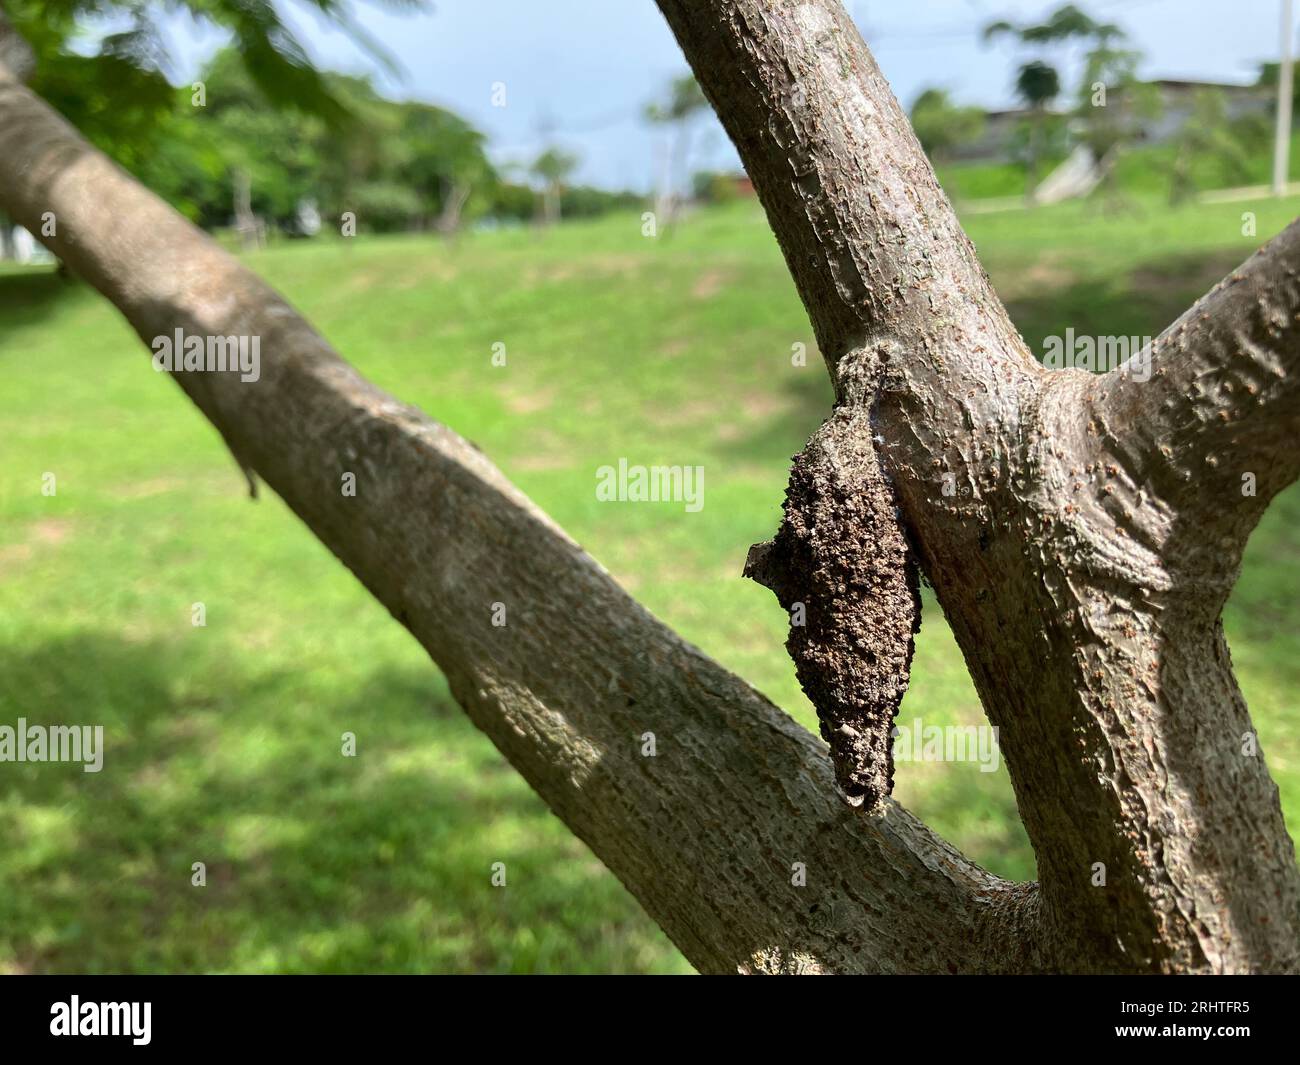 A close-up of a Psychidae dangling on a garden tree limb. Stock Photo